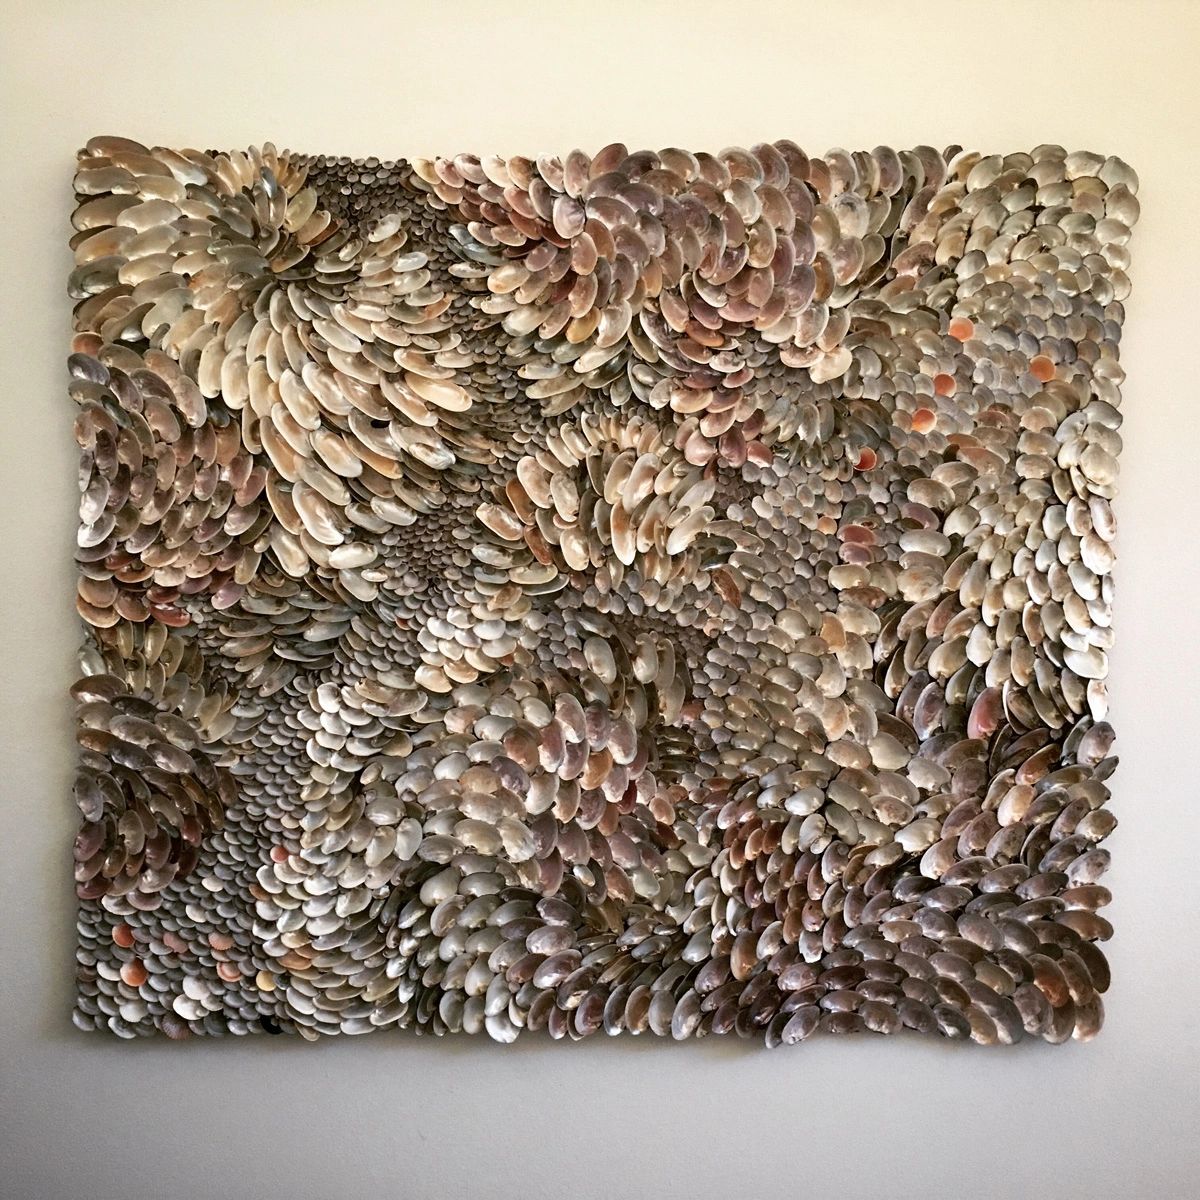 "Morning Glory" is a wall sculpture made of mussel shells.